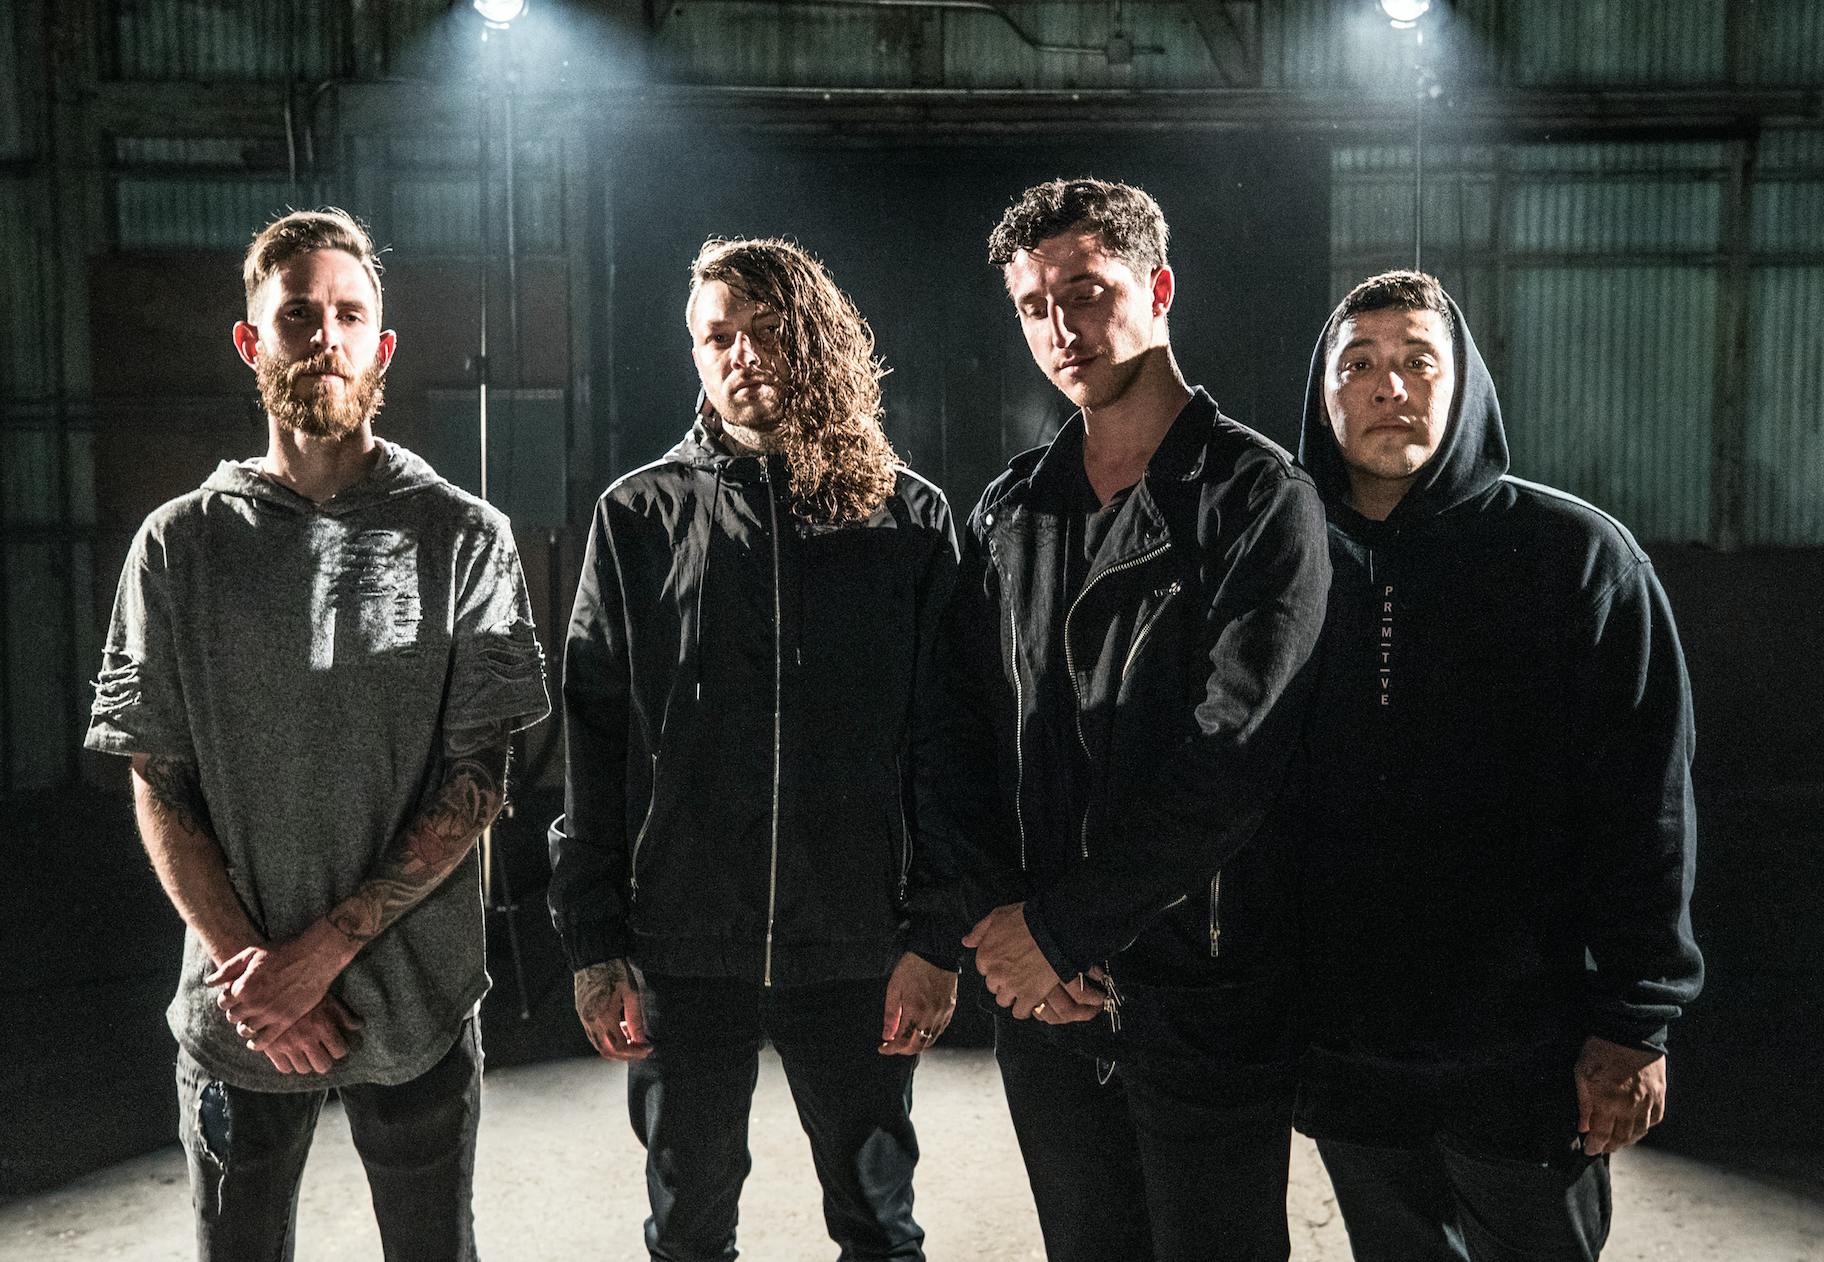 Chelsea Grin have announced a fall tour with The Acacia Strain, Spite, Traitors & Left Behind